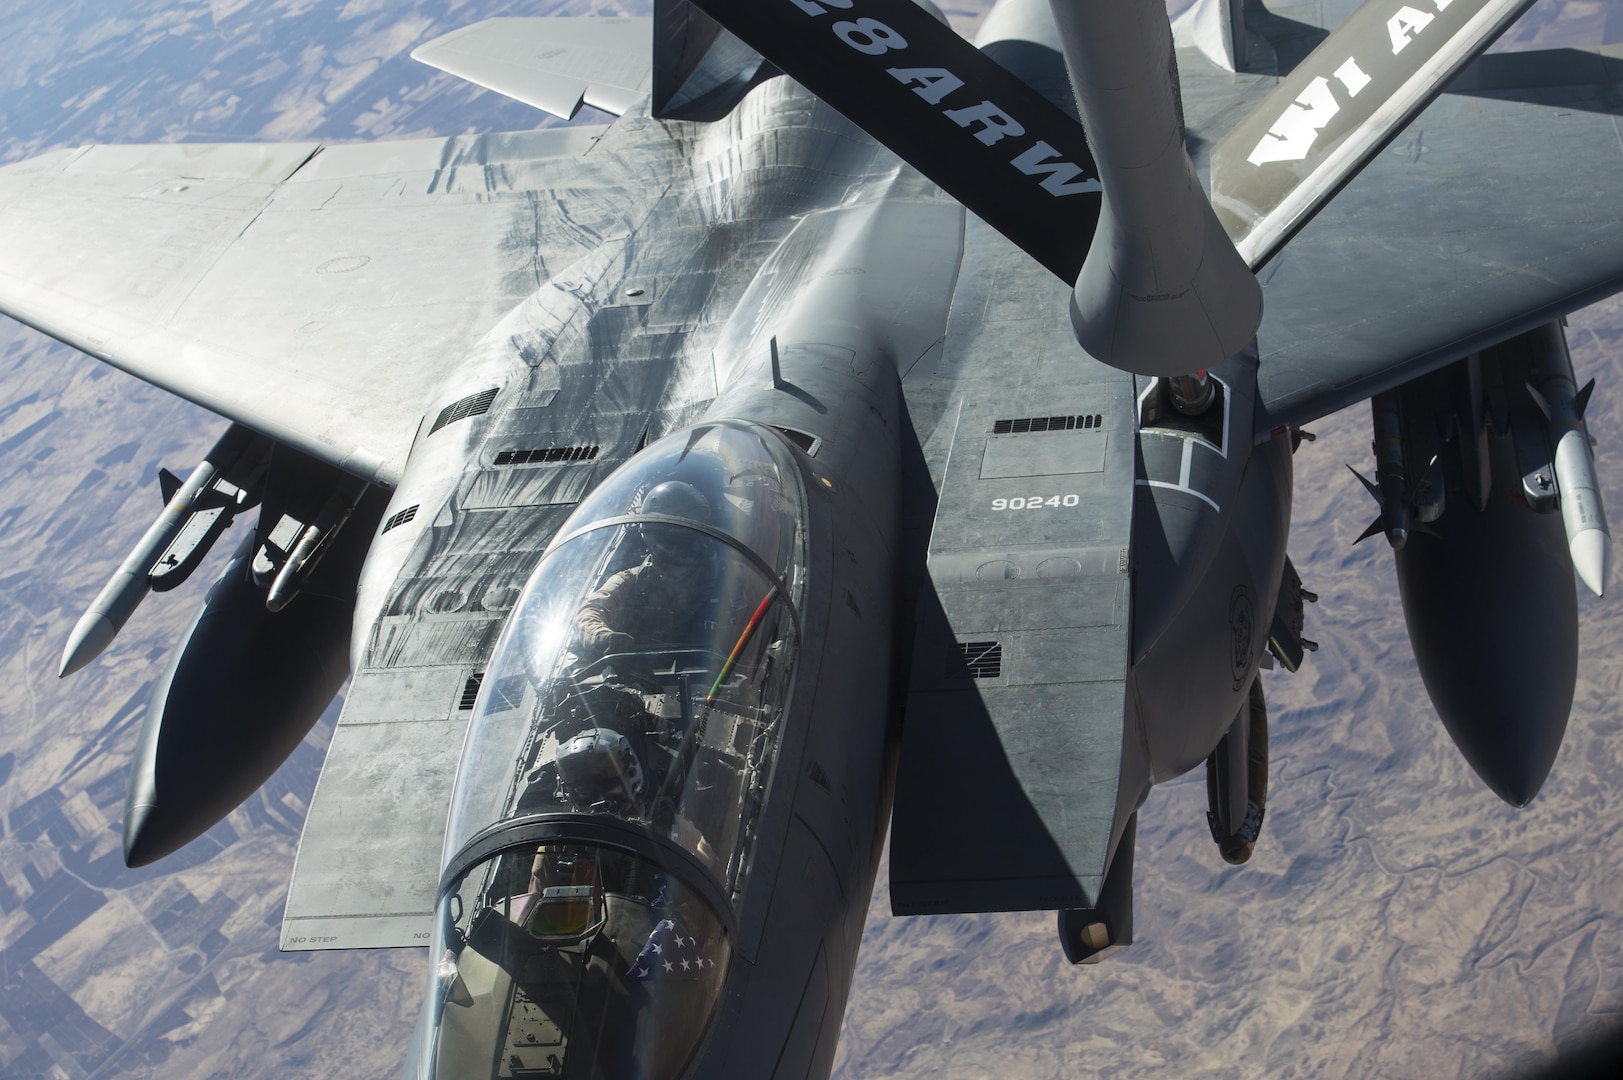 A U.S. Air Force F-15 Strike Eagle receives fuel from a KC-135 Stratotanker in support of a Combined Joint Task Force - Operation Inherent Resolve mission over Iraq Dec. 7, 2016. The KC-135 provides aerial refueling capabilities for the CJTF as it supports the Iraqi Security Forces and the partnered forces in Syria as they work to liberate territory and people under the control of Da’esh. (U.S. Air Force photo by Staff Sgt. Matthew B. Fredericks)